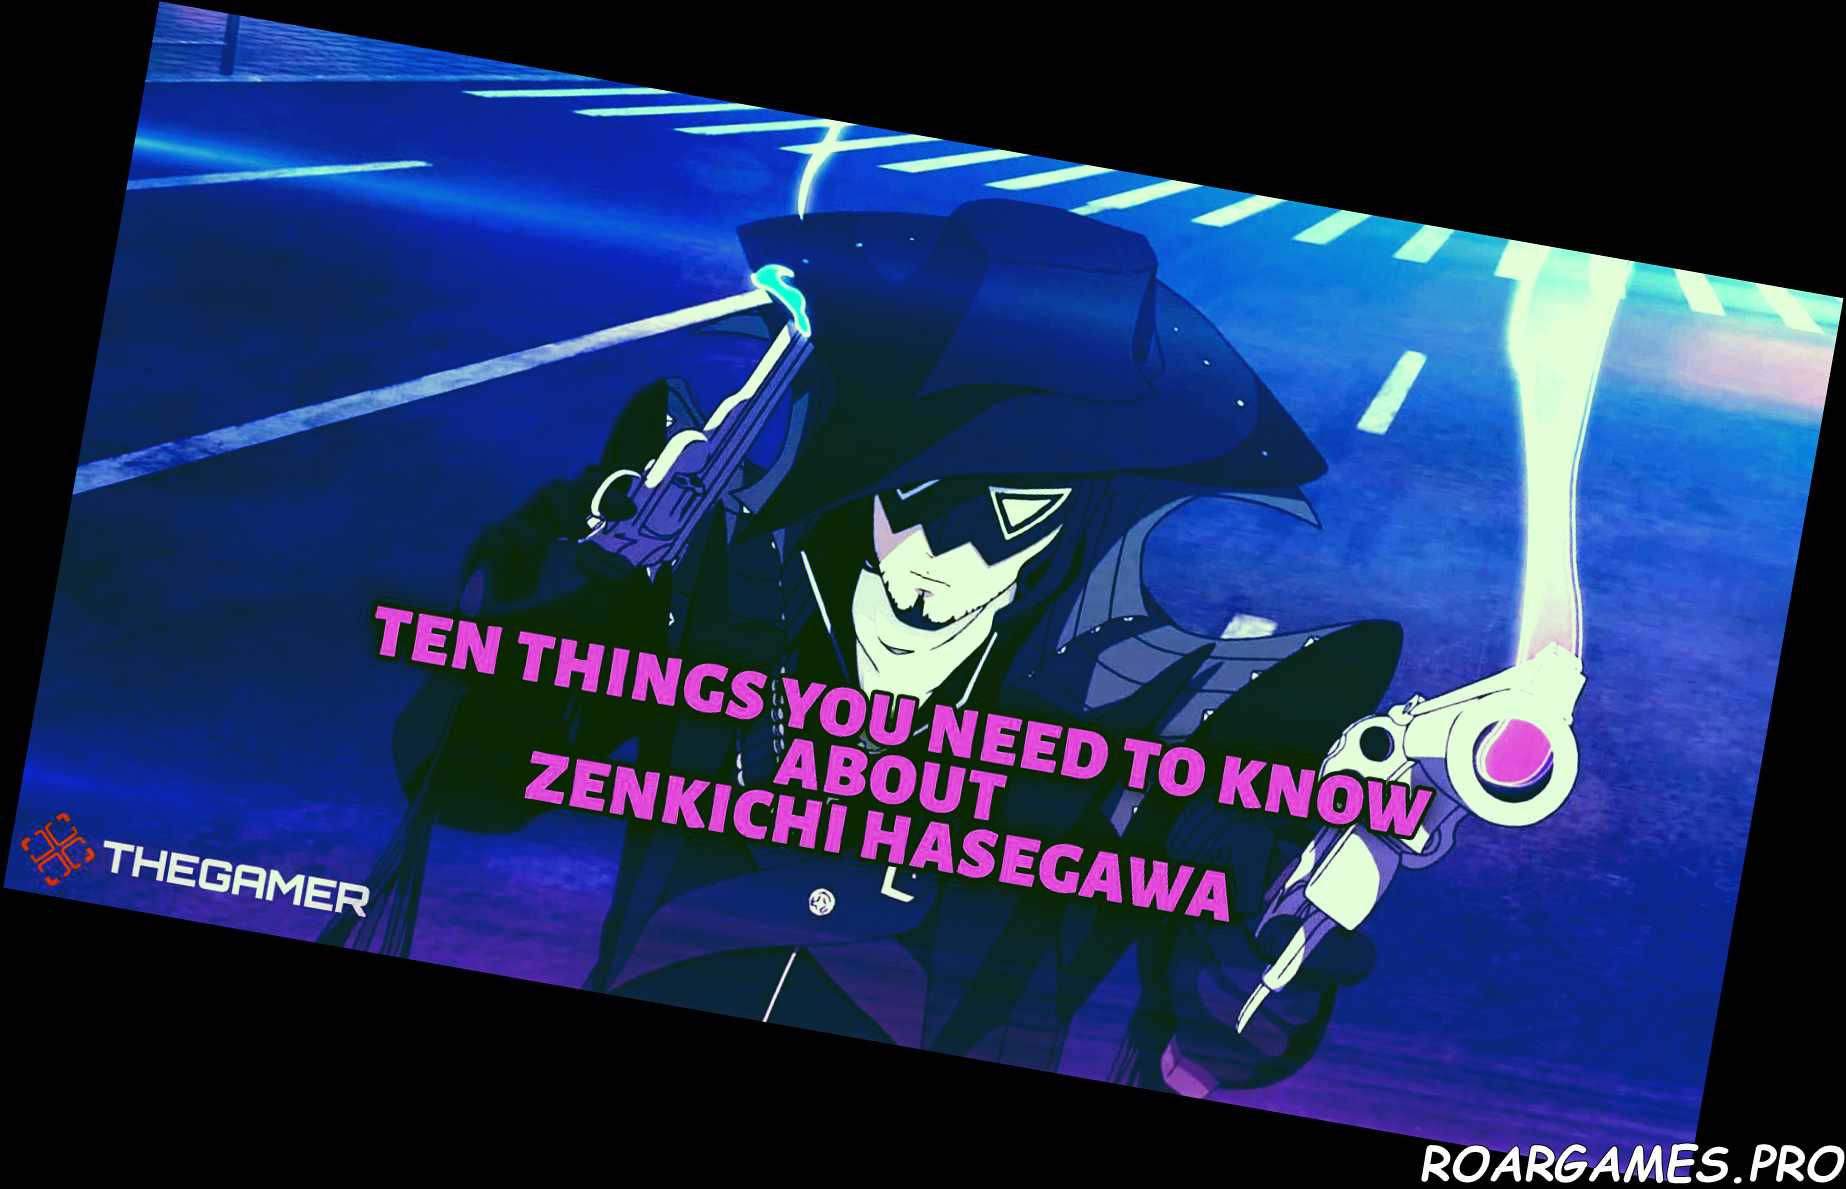 Persona 5 Strikers Ten Things You Need to Know About Zenkichi Hasegawa